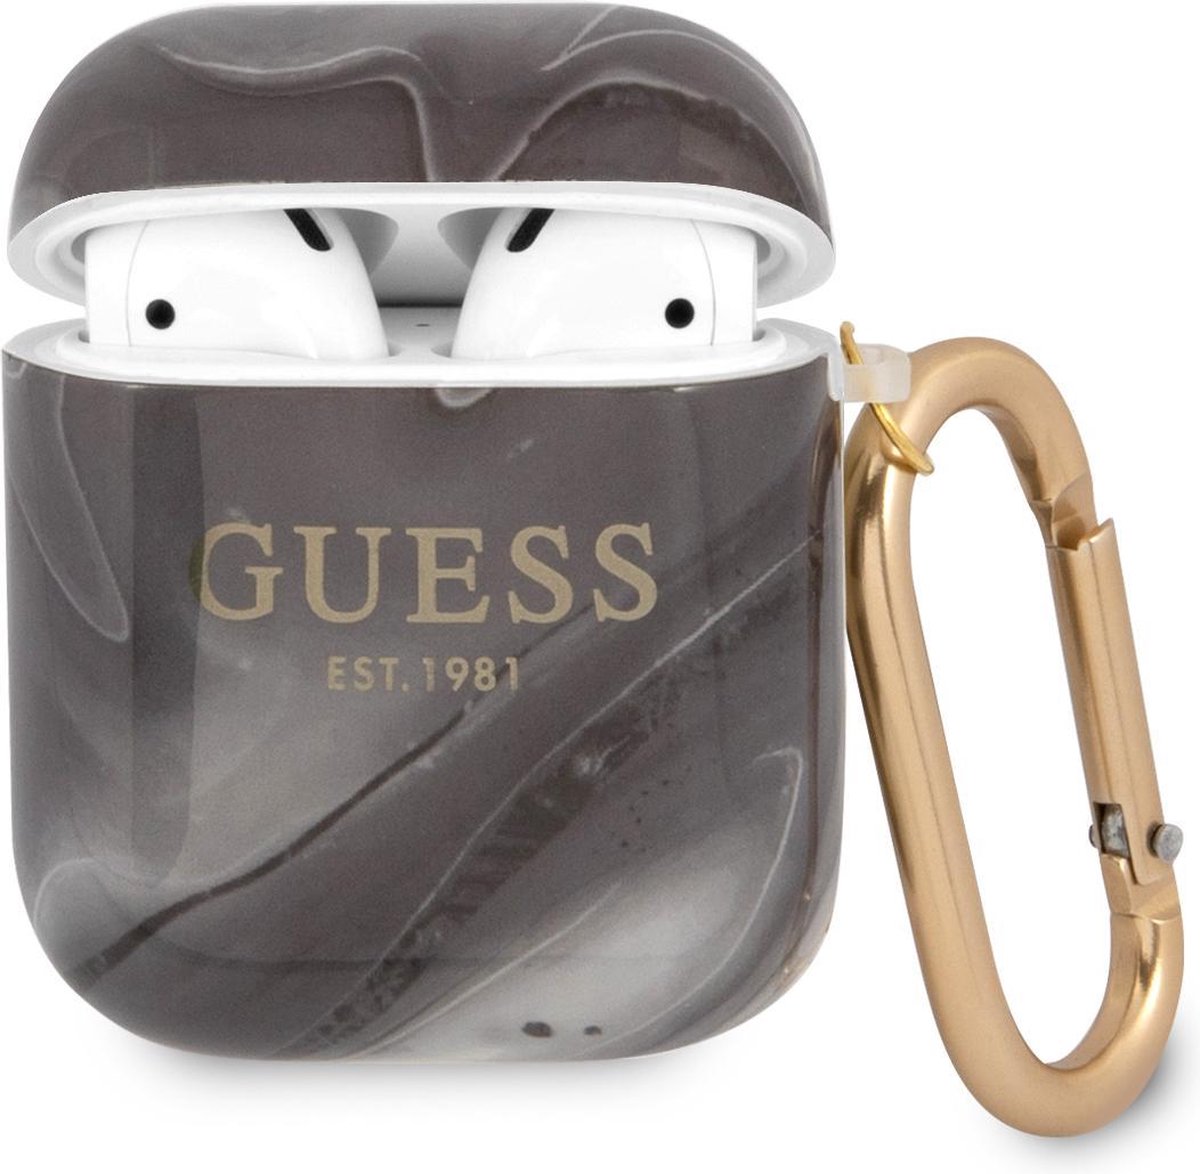 Guess Shiny Marmer AirPods 1 - AirPods 2 Case Zwart